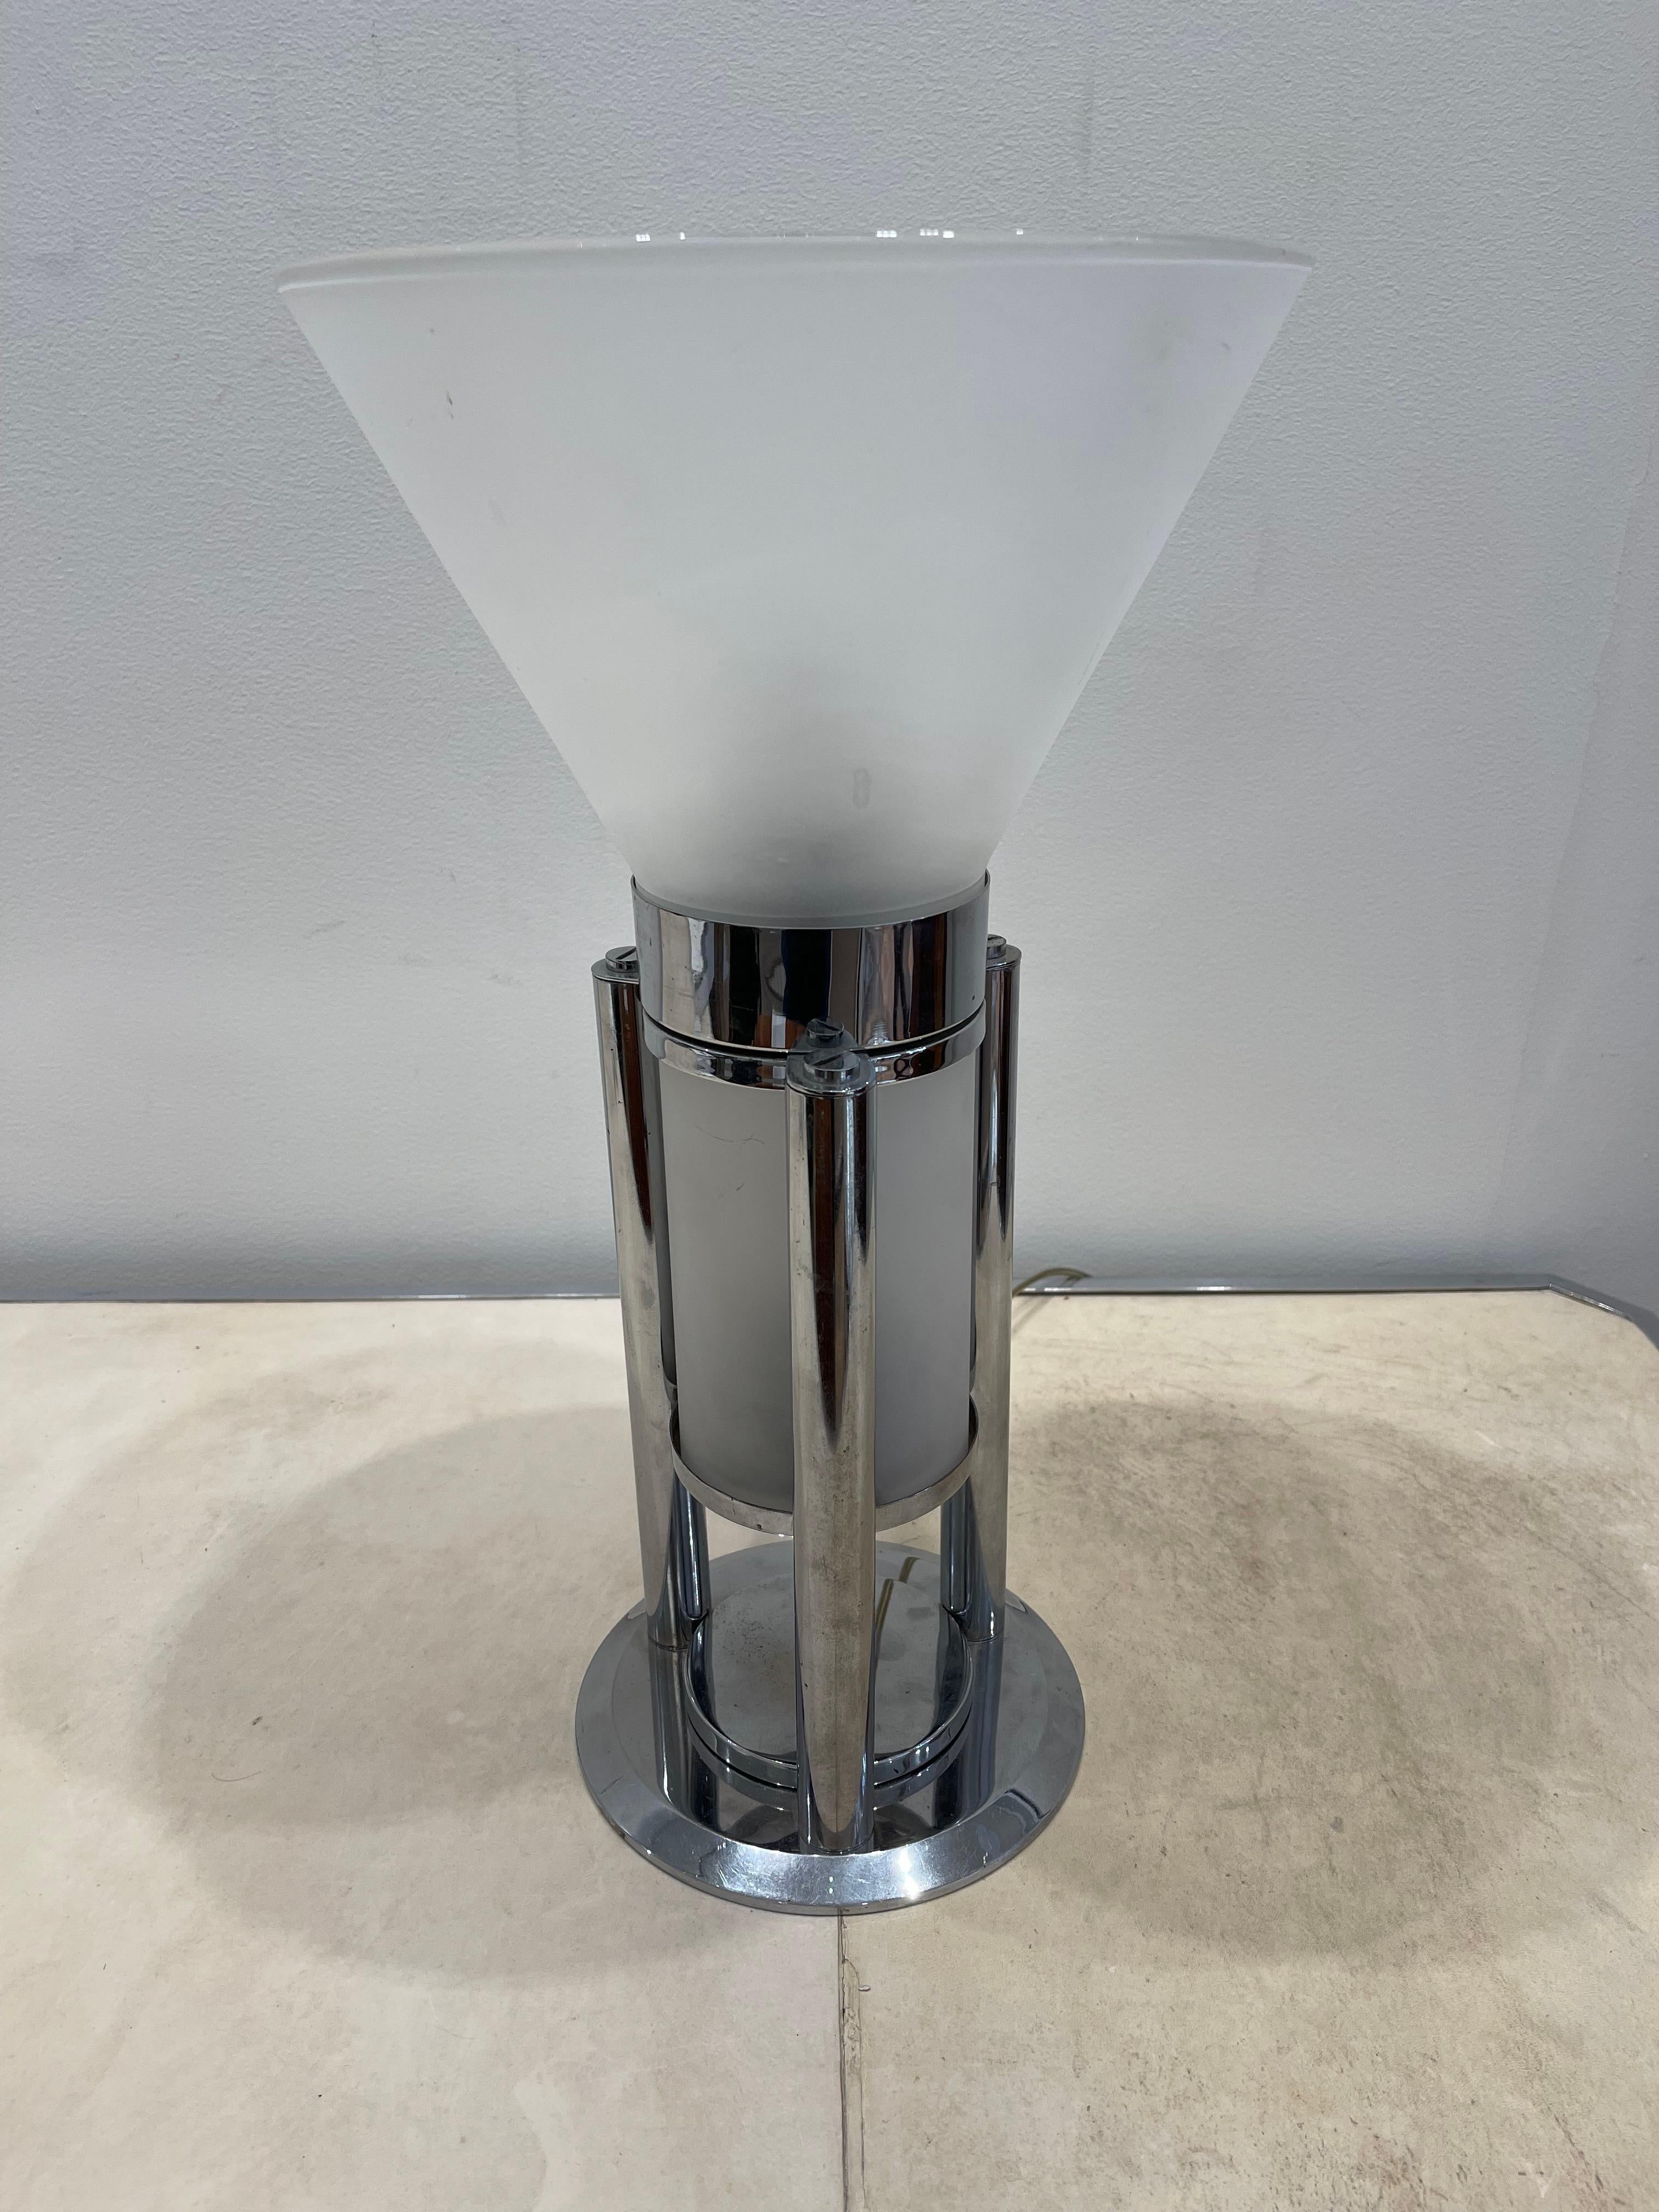 Superb modernist table lamp by Jean-Boris Lacroix. This lamp was produced by Mitis a leading French design studio during the art deco period. It is made of Chromed metal and sandblasted glass. It has 2 light bulbs : one in the bottom glass cylinder